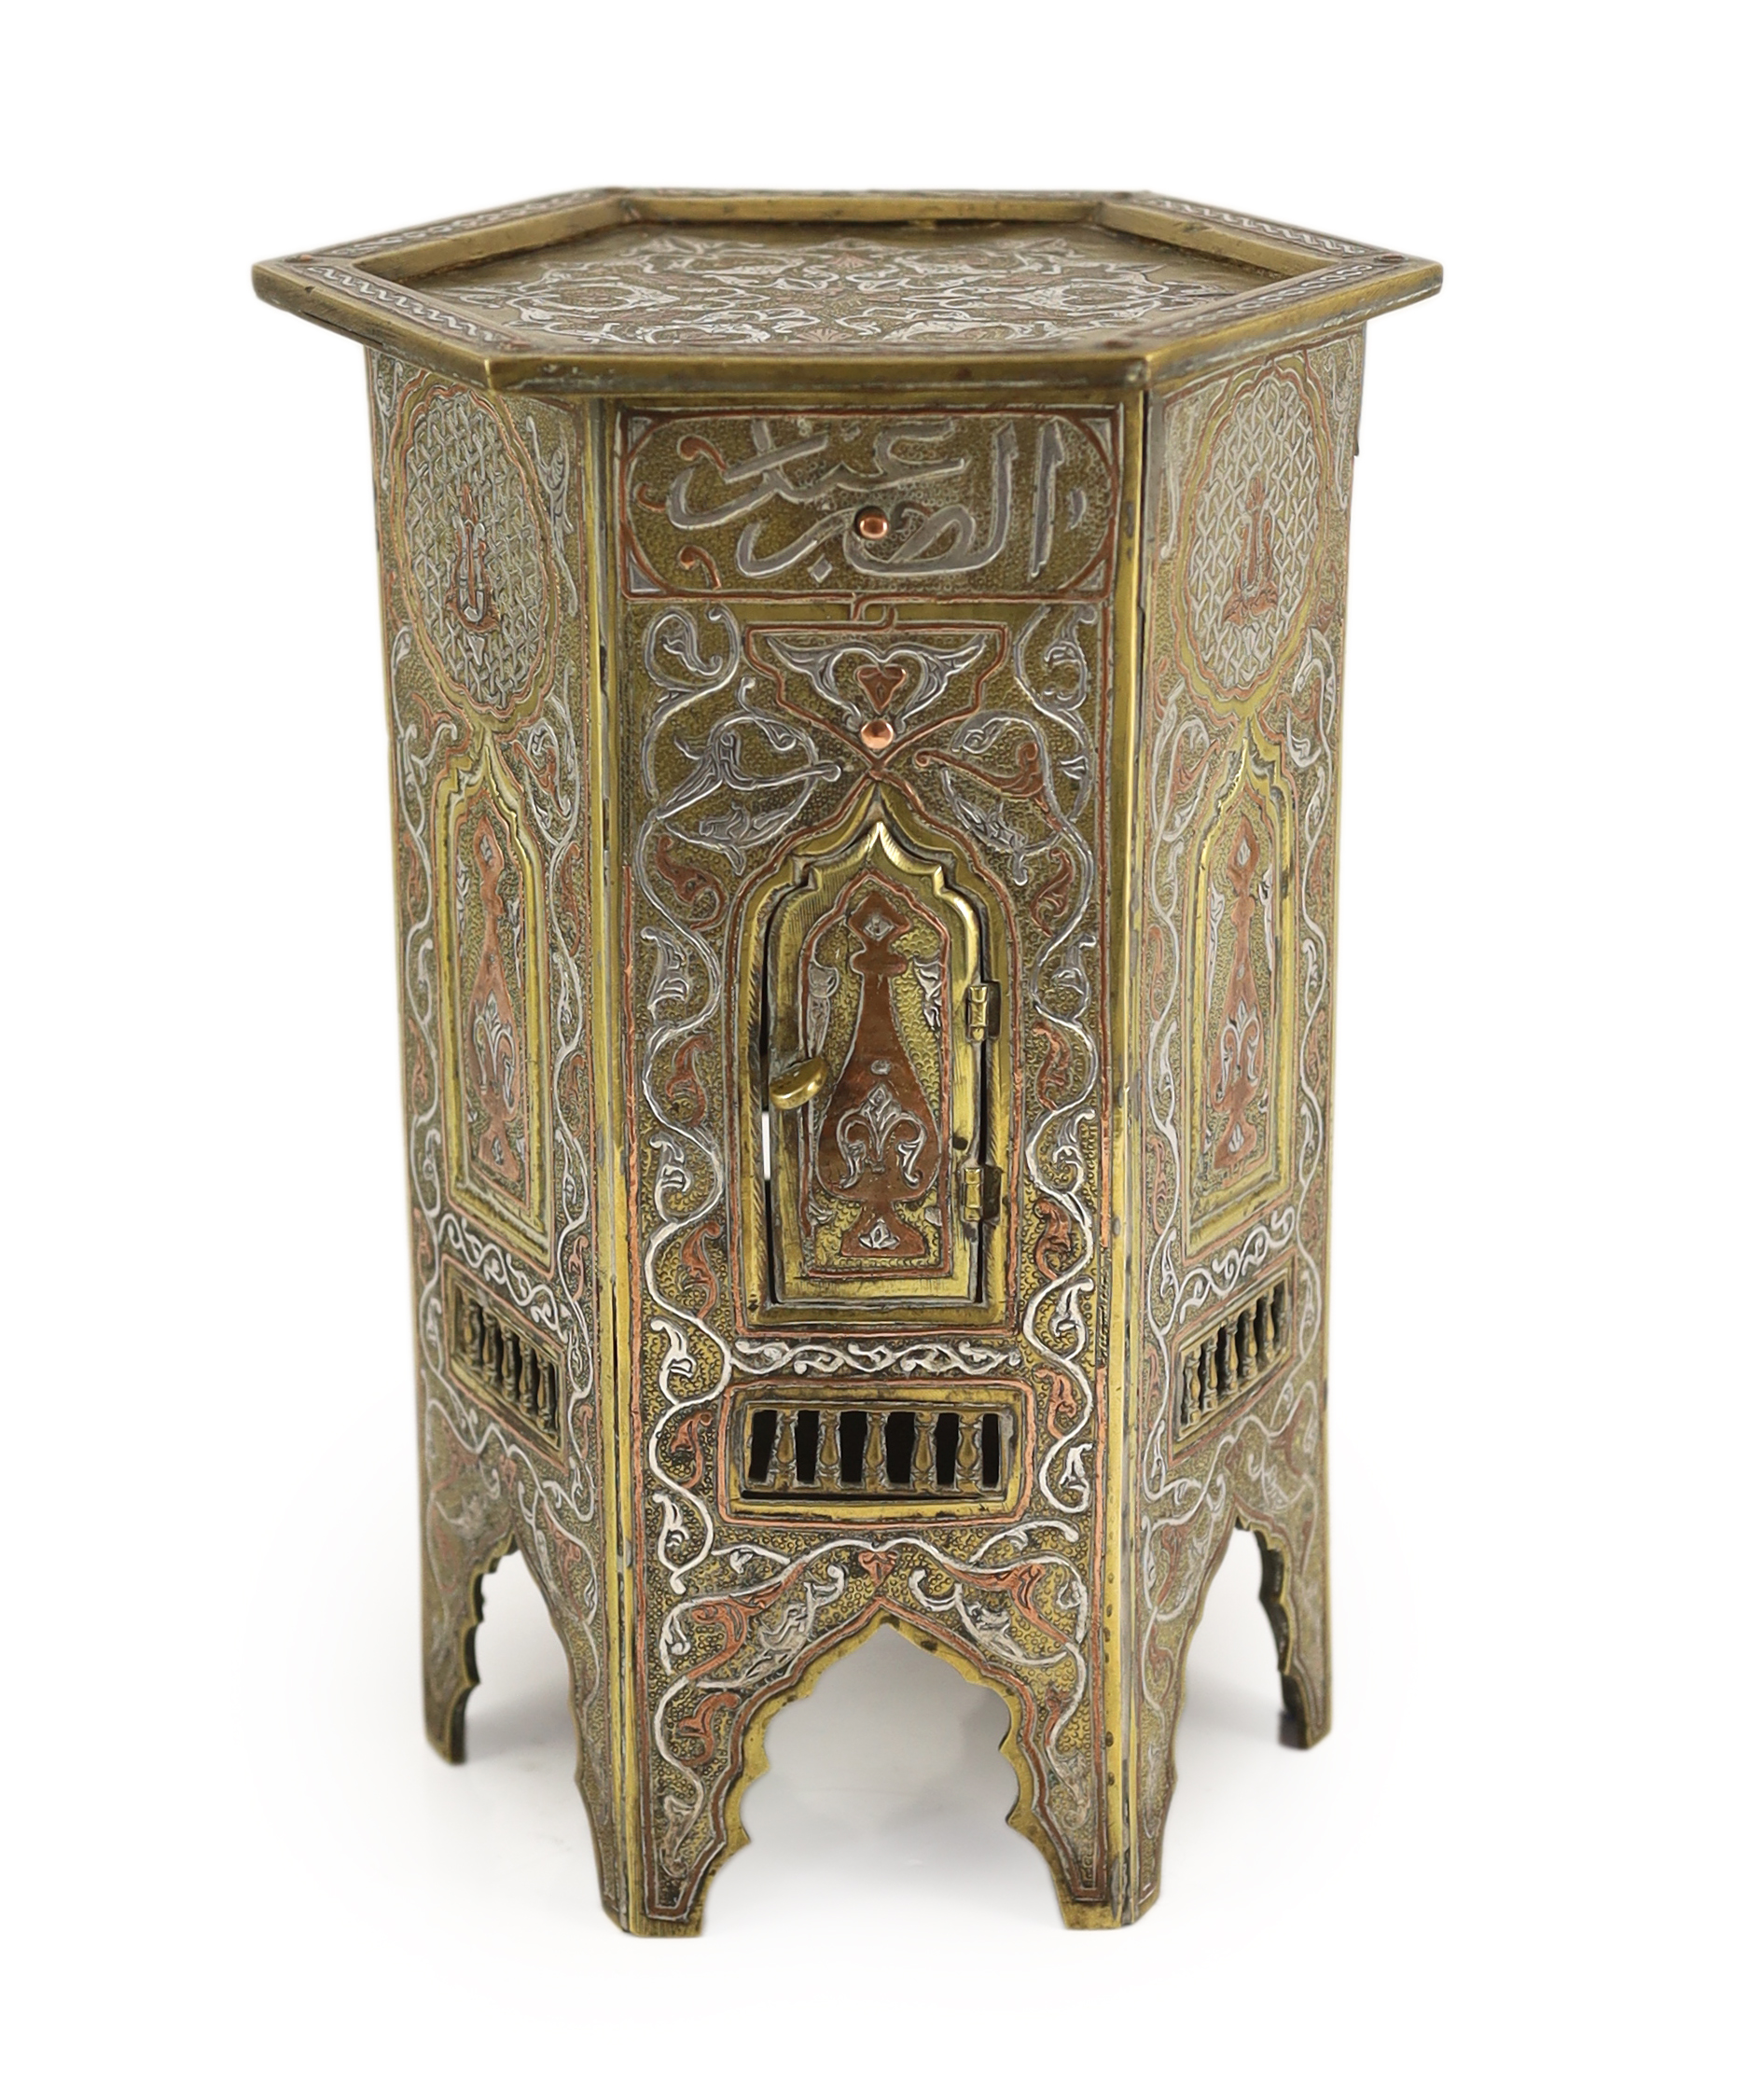 A Cairo ware silver and copper inlaid brass Qur’an stand, early 20th century